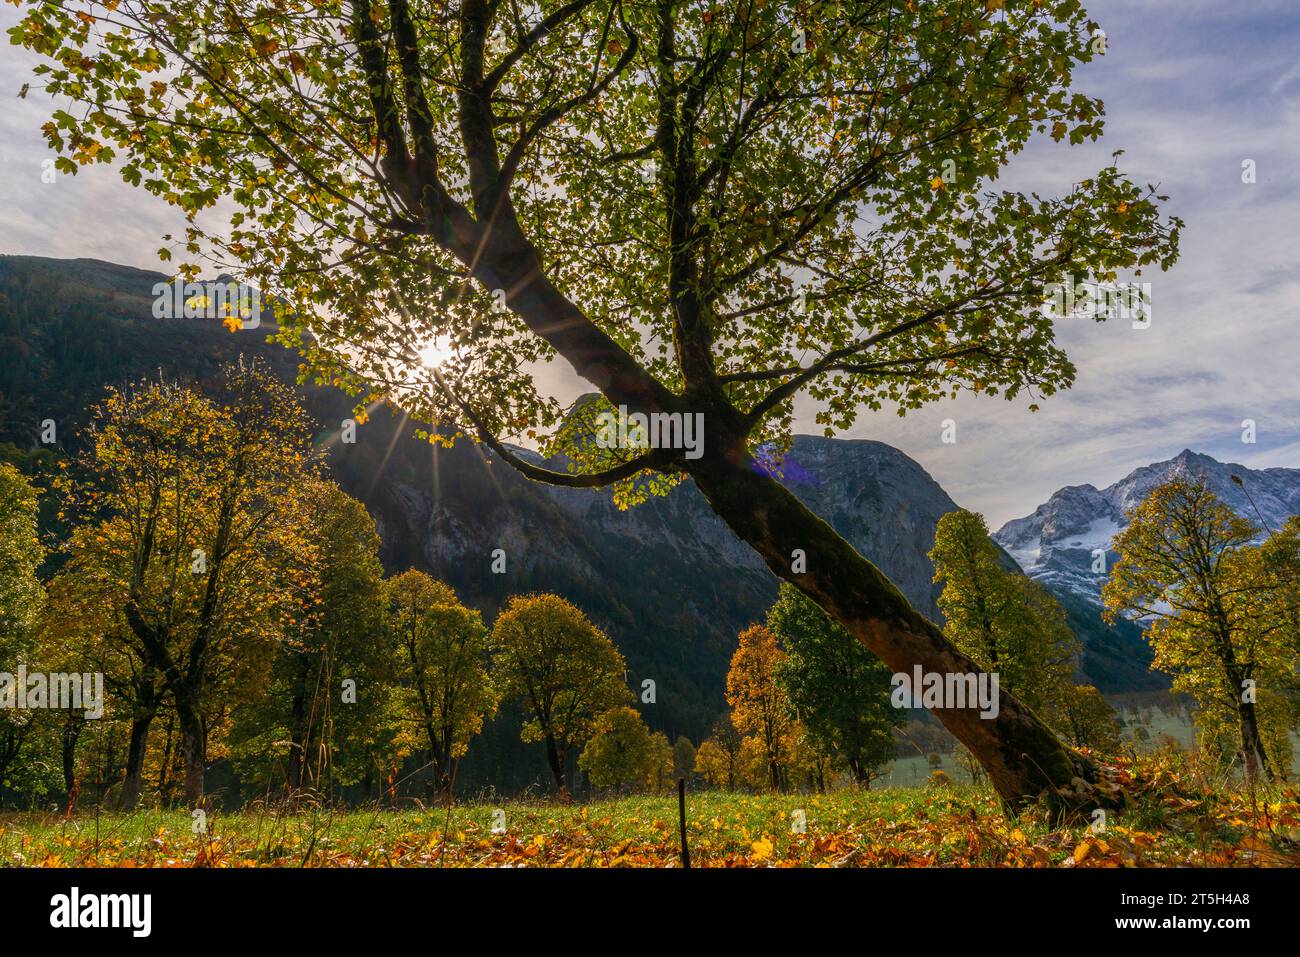 Coloratissimo foilage autunnale nell'Ahorn Boden, Maple Ground, Engtal o Eng Valley, riserva naturale Karwendel Masif, Alpi, Austria, Foto Stock